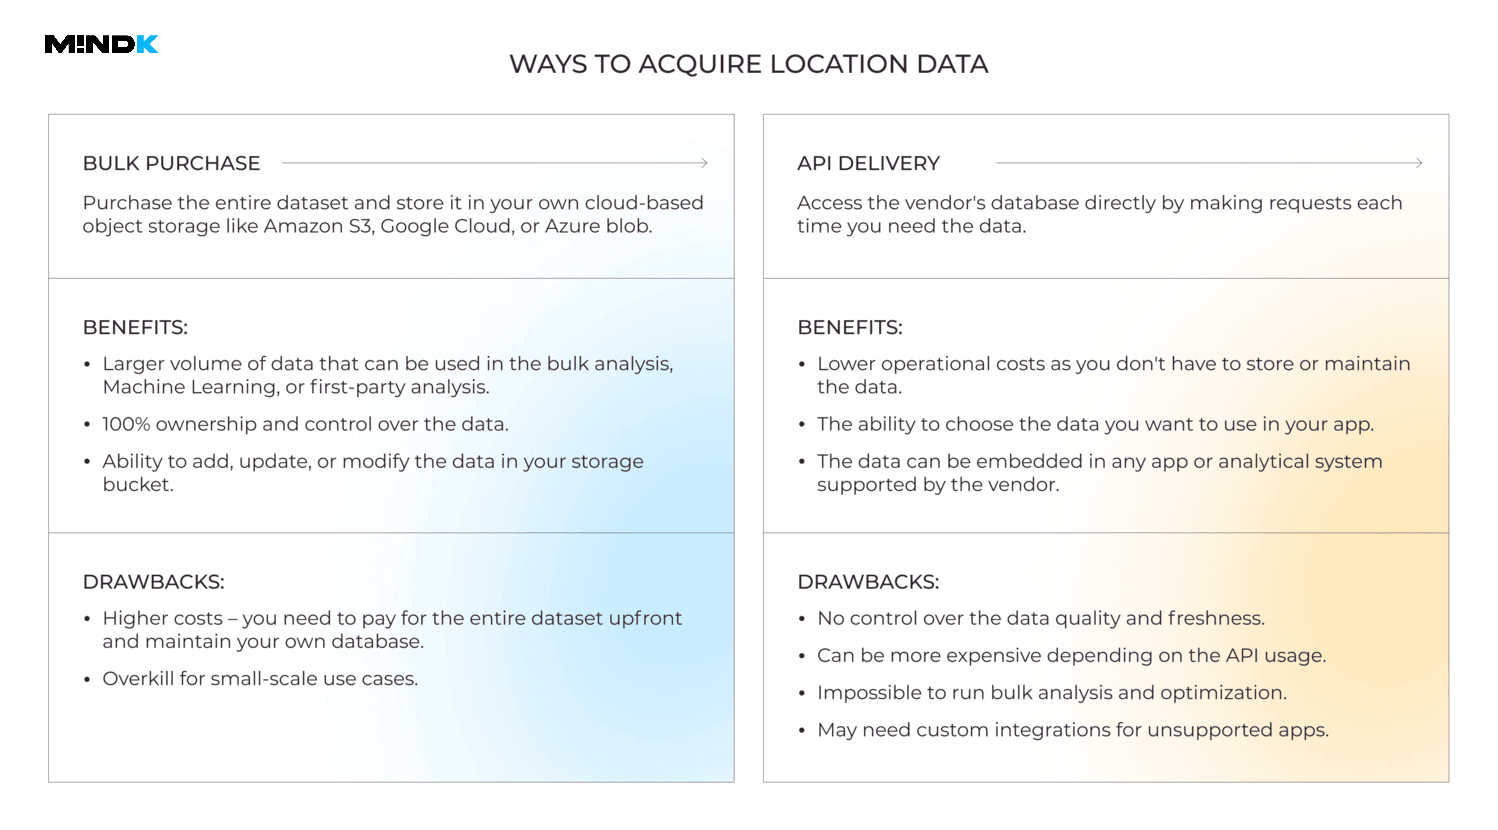 Ways to acquire location data to build a geolocation app